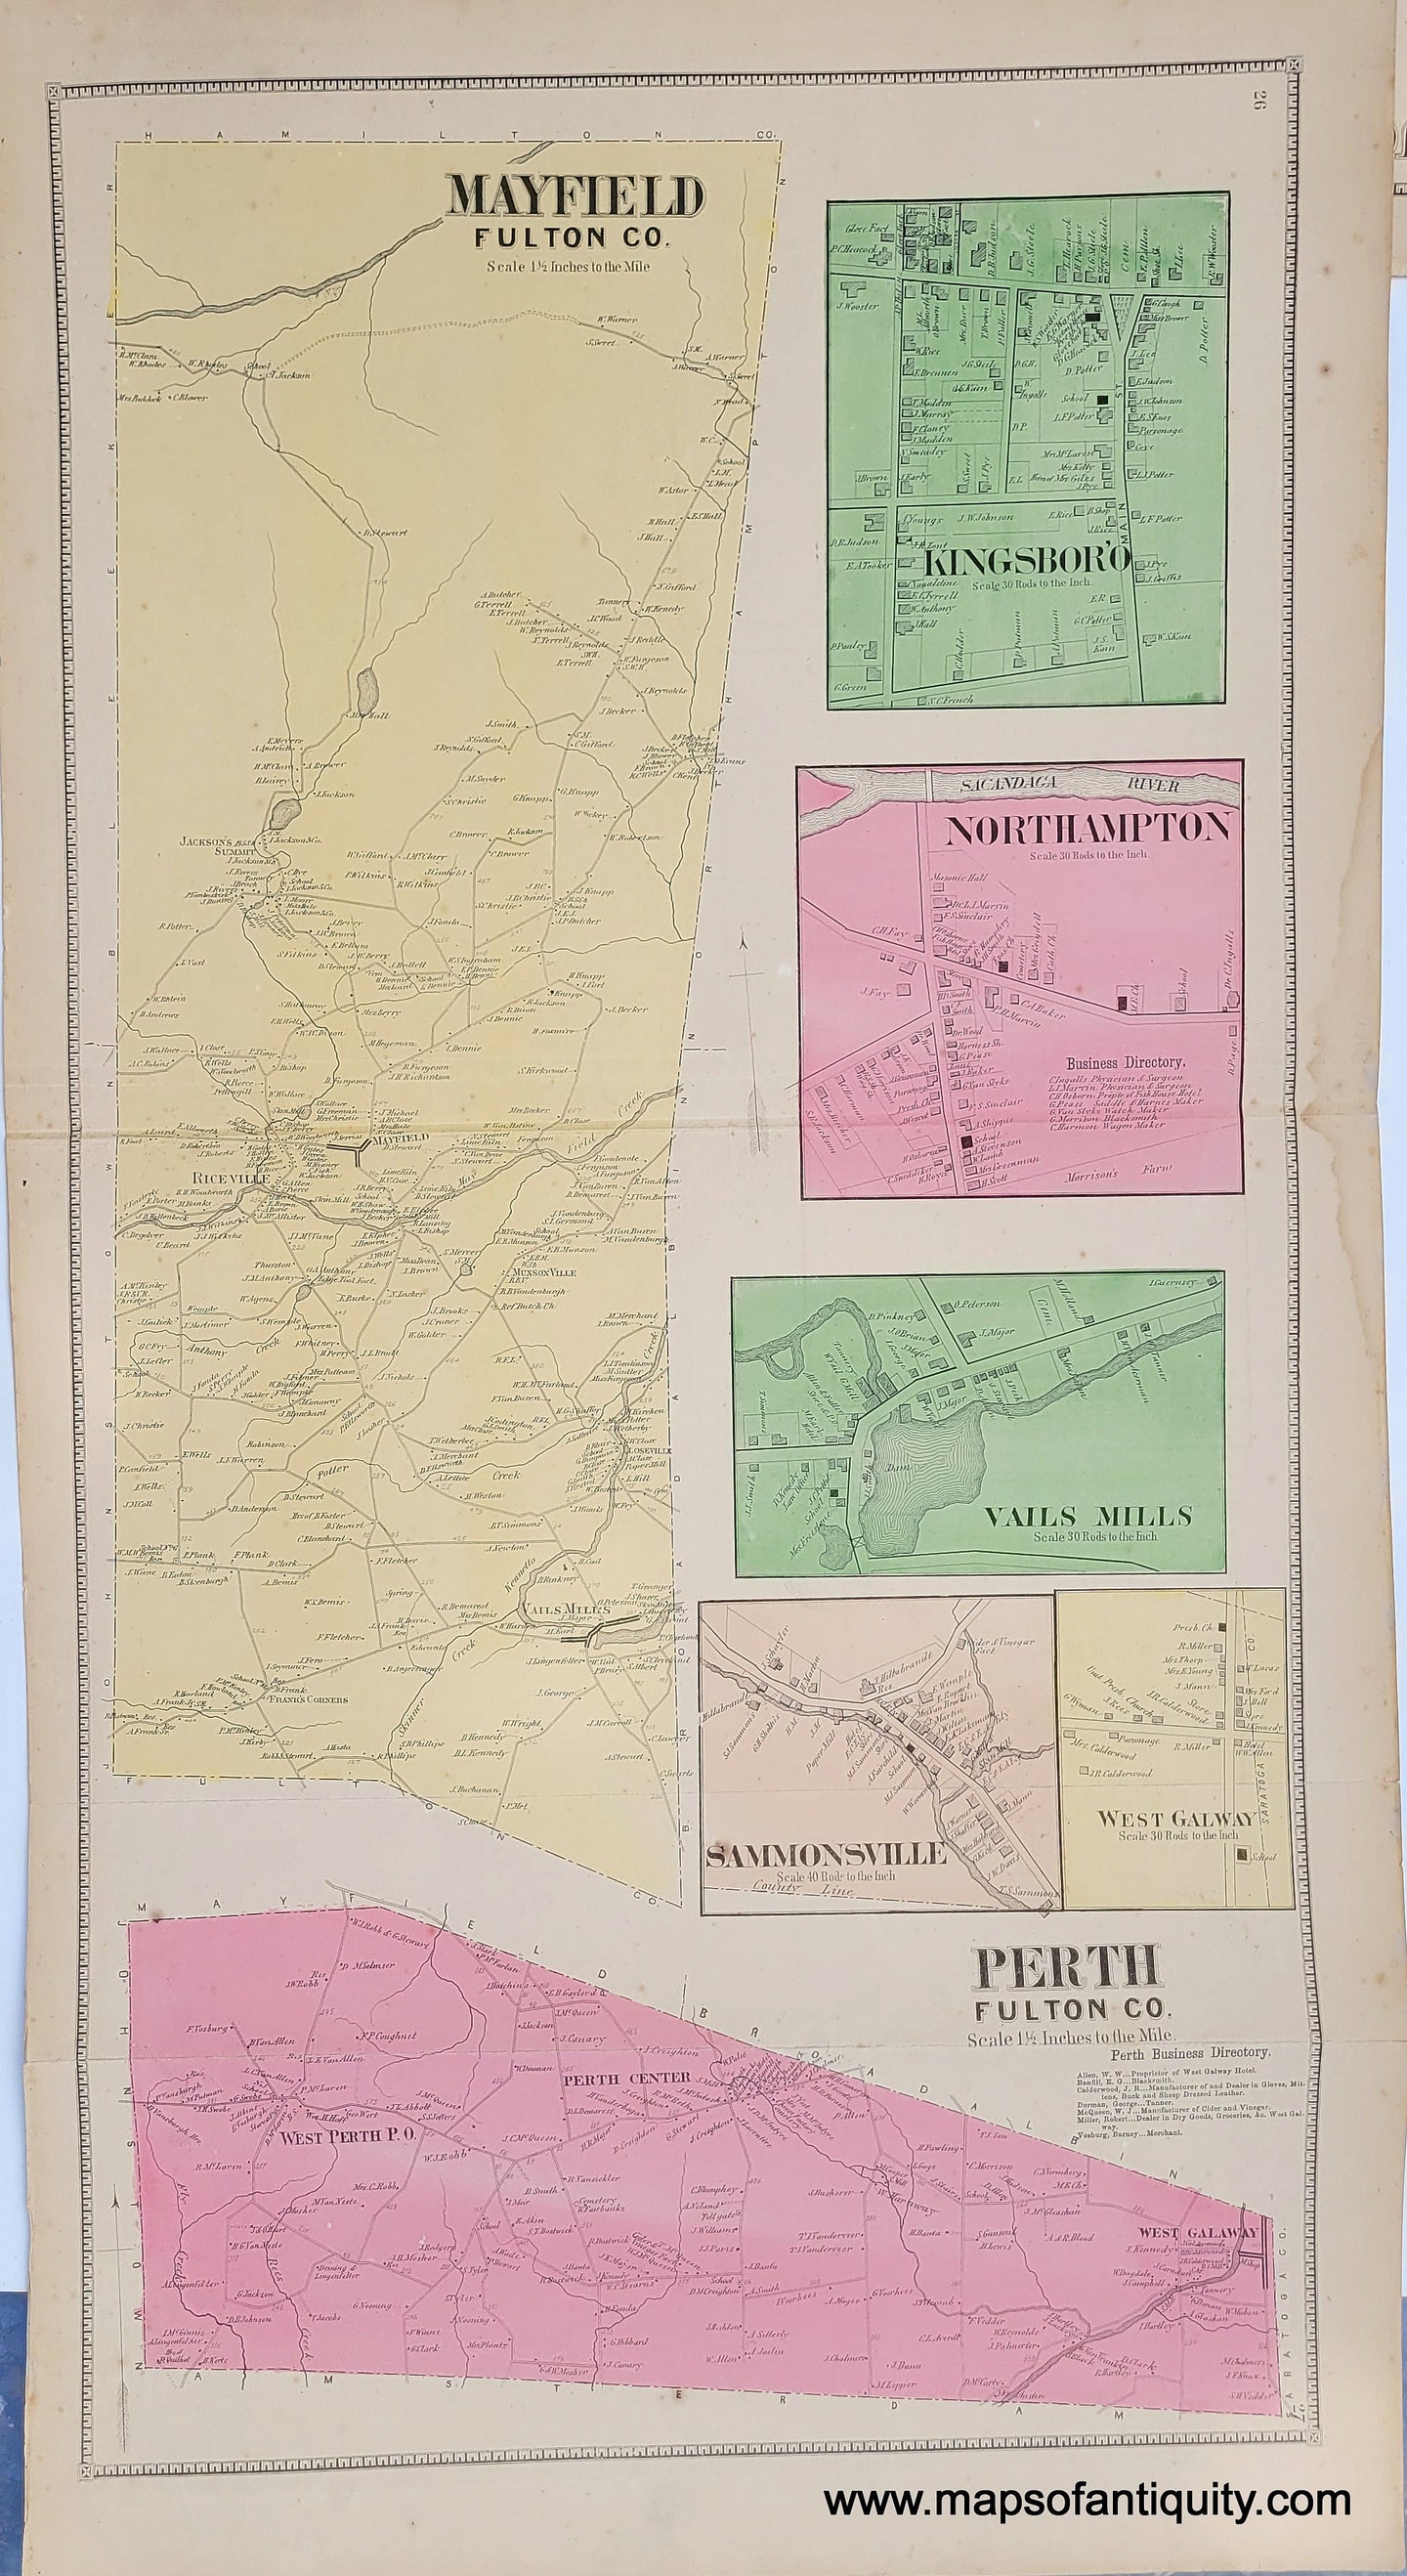 Genuine-Antique-Map-Mayfield-Perth--New-York--1868-B-Nichols-Maps-Of-Antiquity